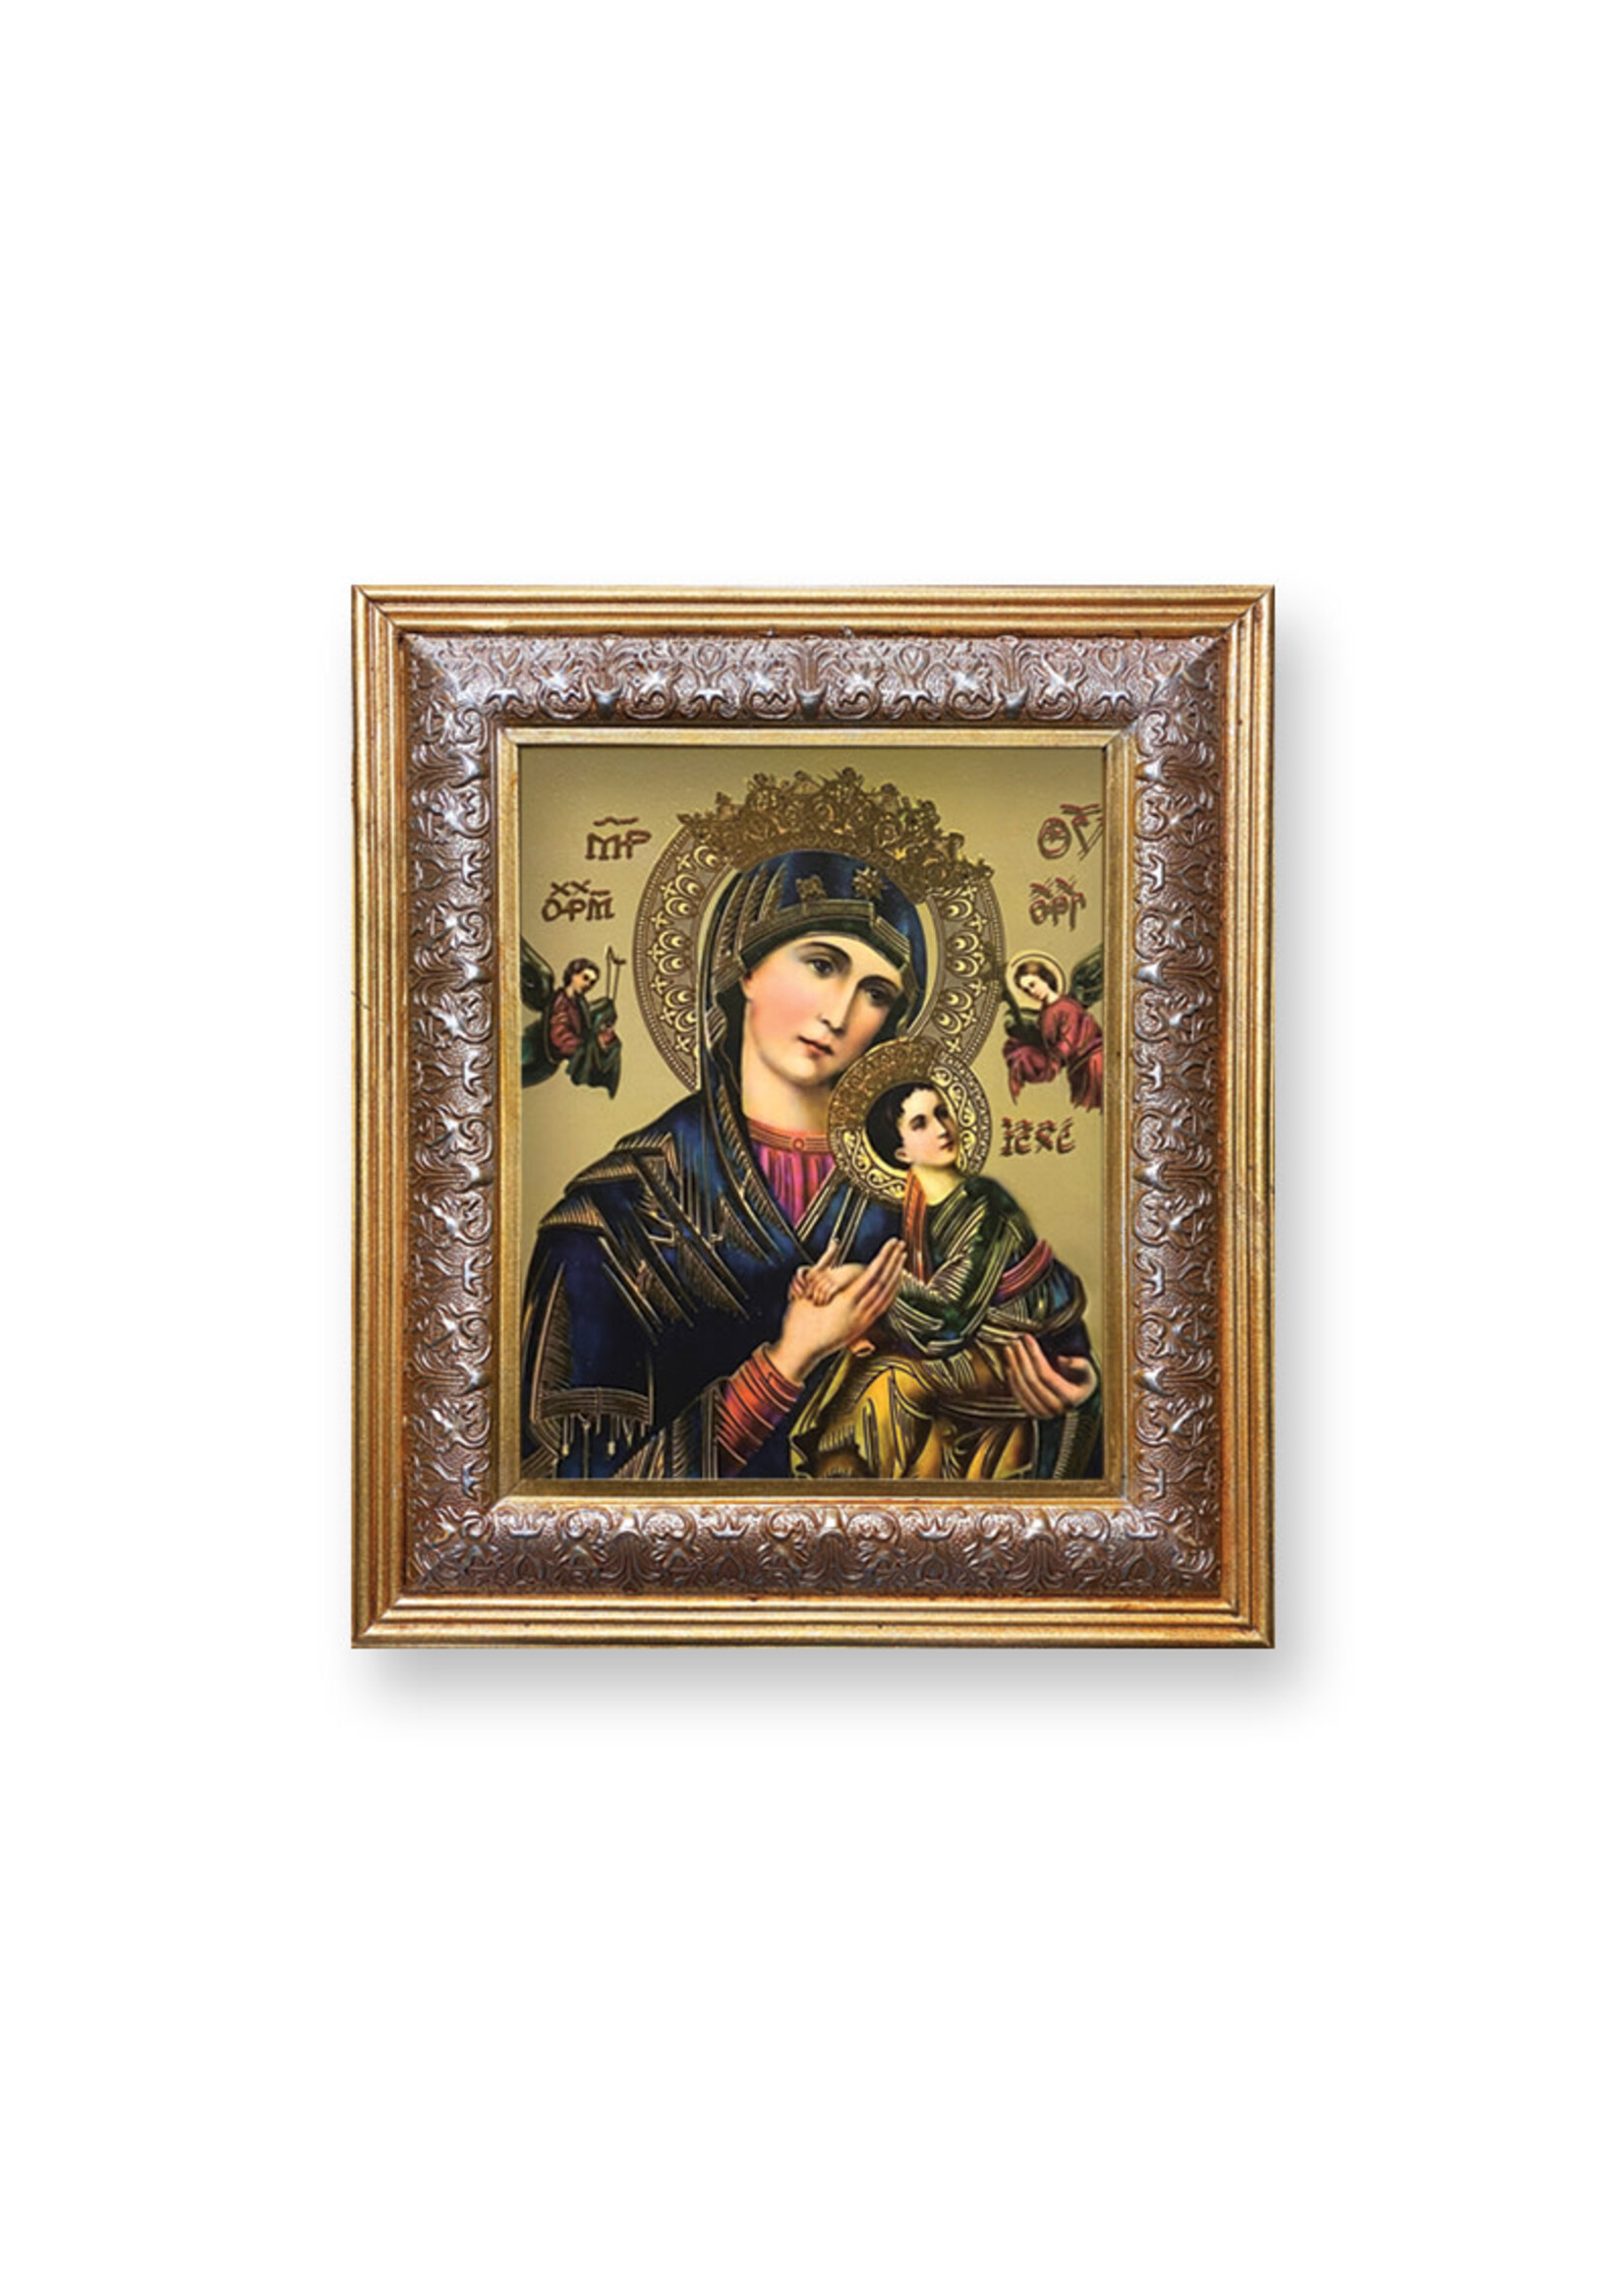 Our Lady of Perpetual Help Framed Image - 21" x 16"